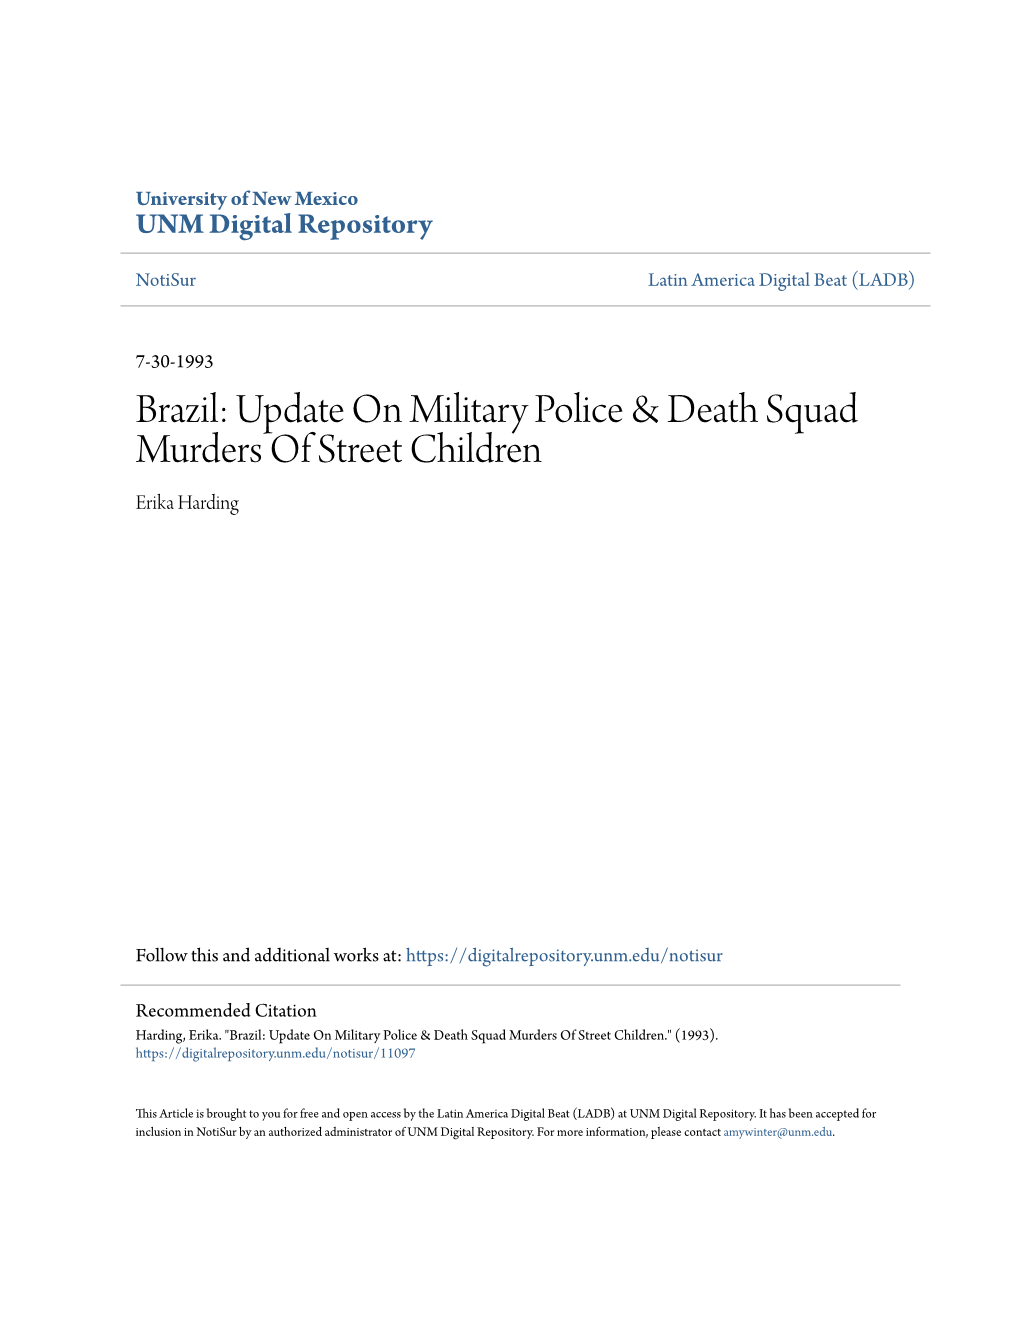 Update on Military Police & Death Squad Murders of Street Children by Erika Harding Category/Department: General Published: Friday, July 30, 1993